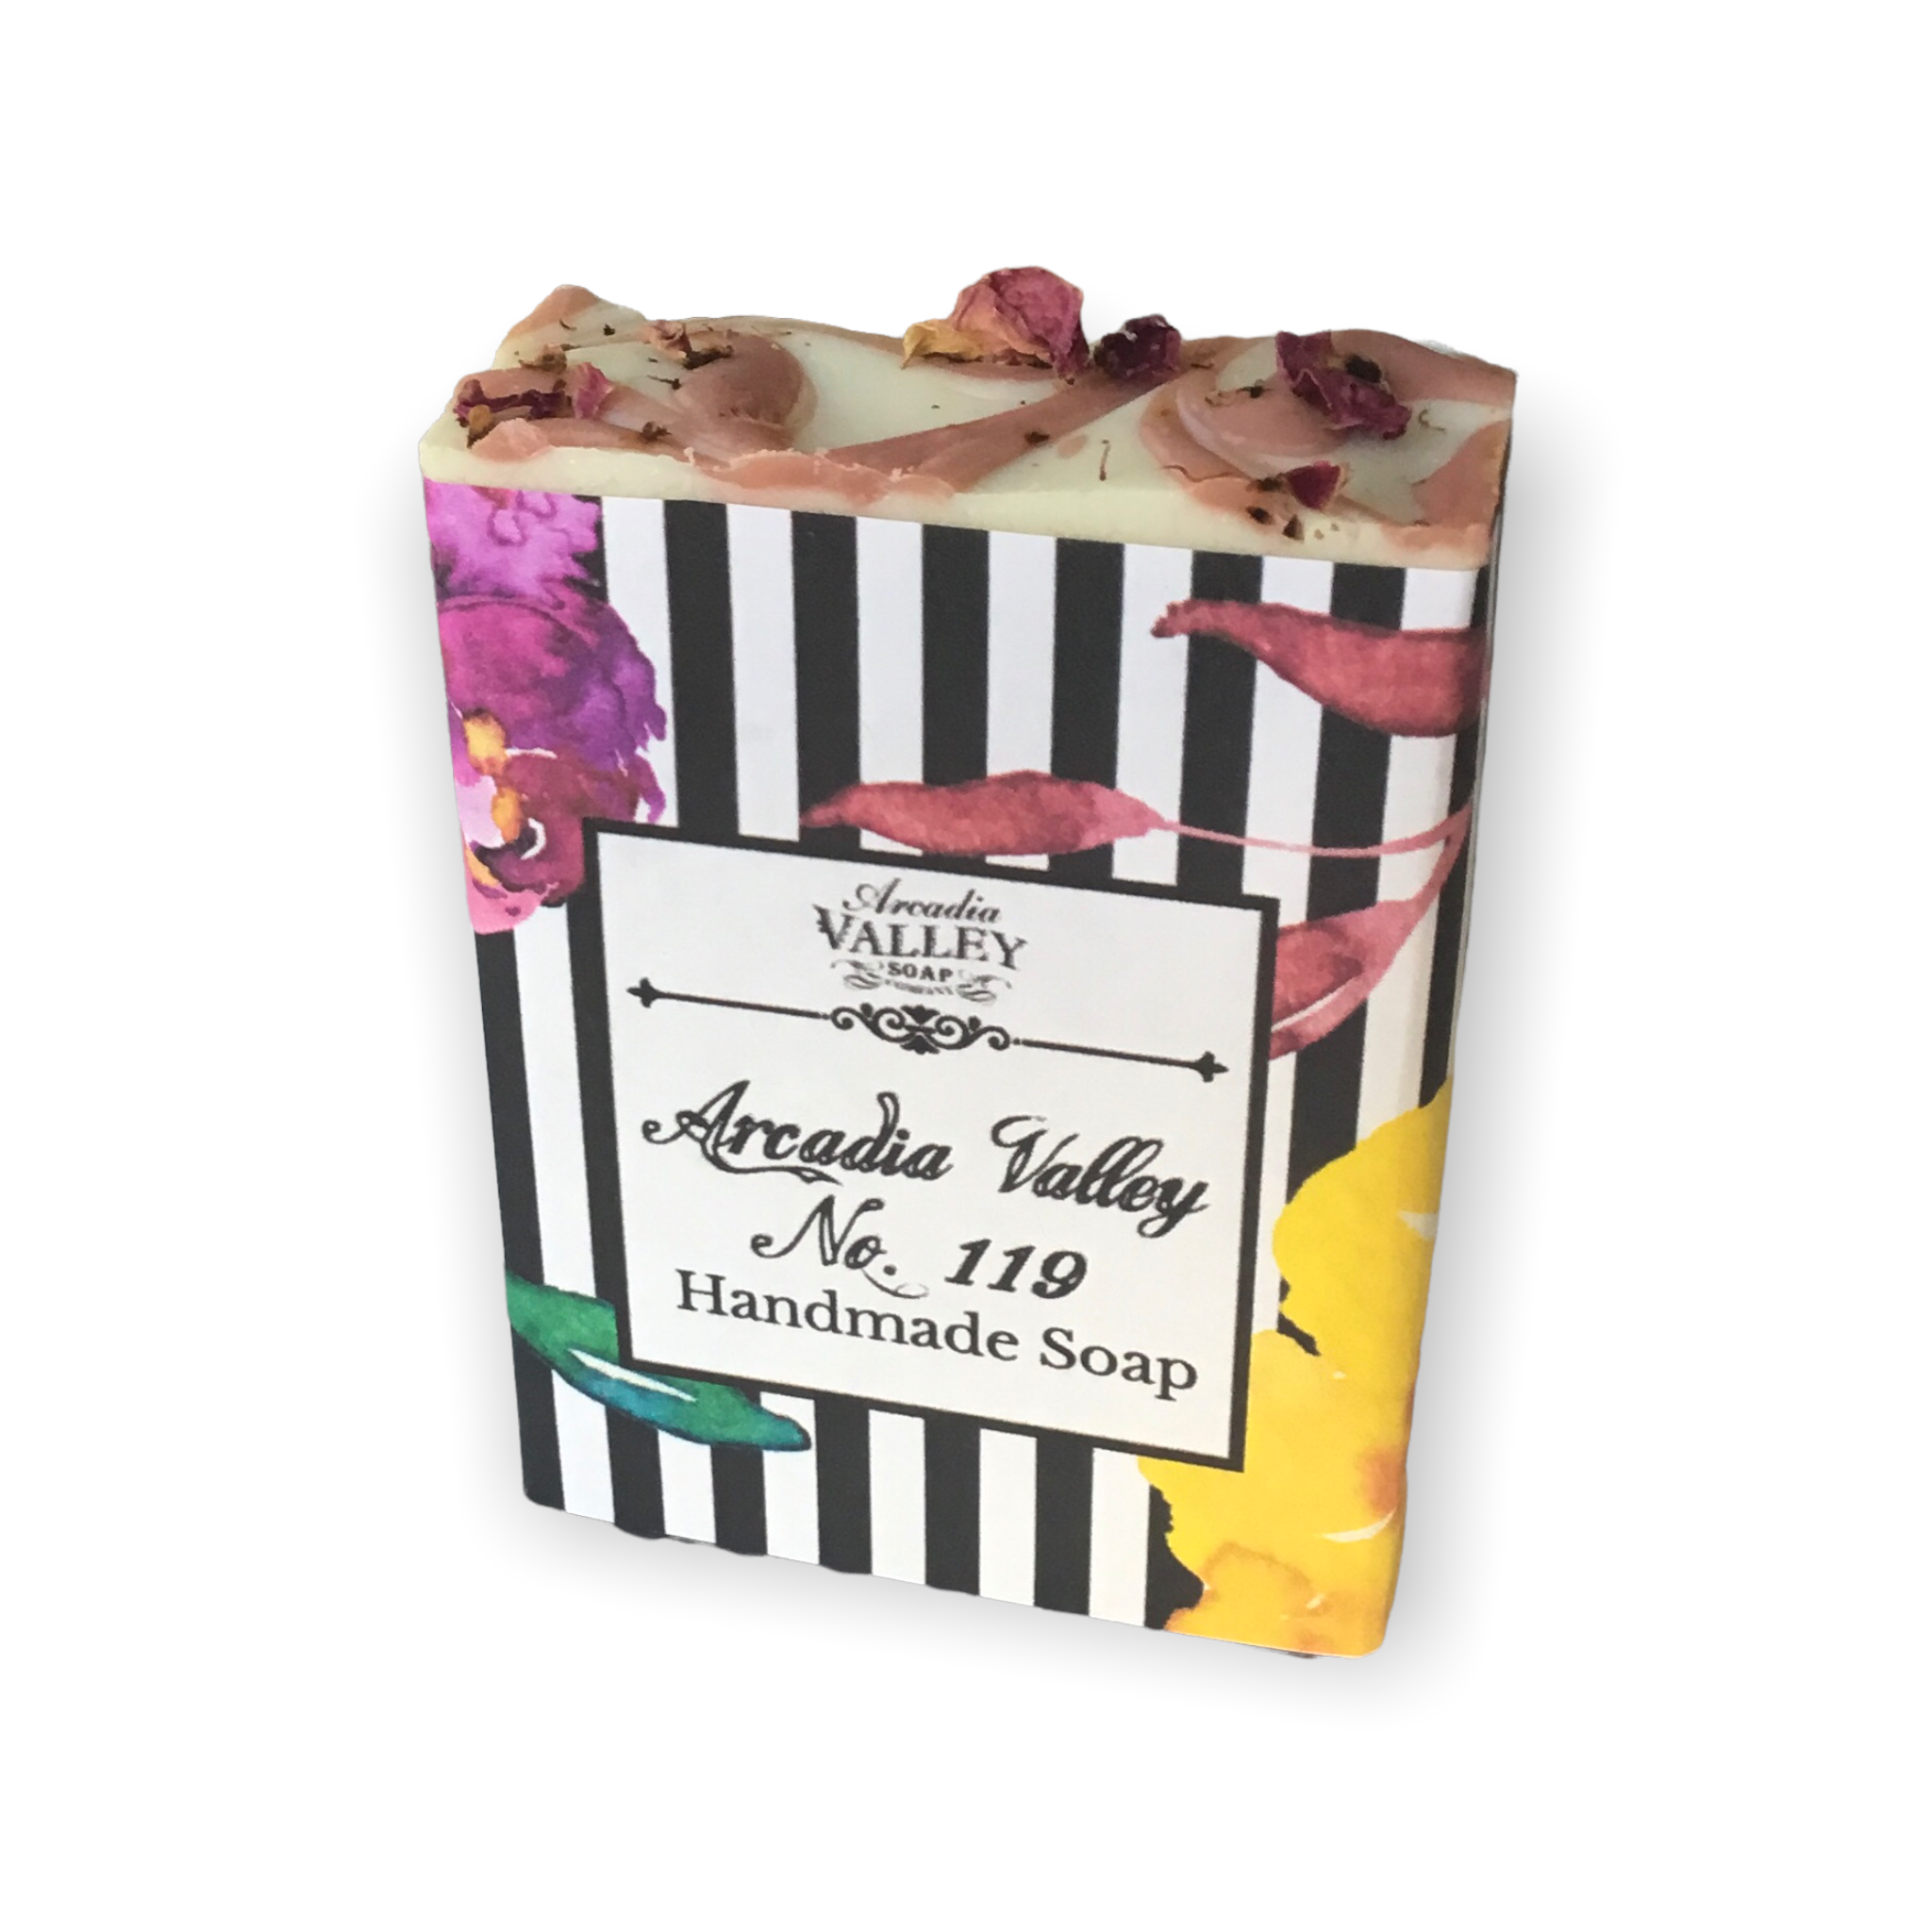 Arcadia Valley No19 Soap bar wrapped in black and white striped paper with dried rose petals on top of bar showing